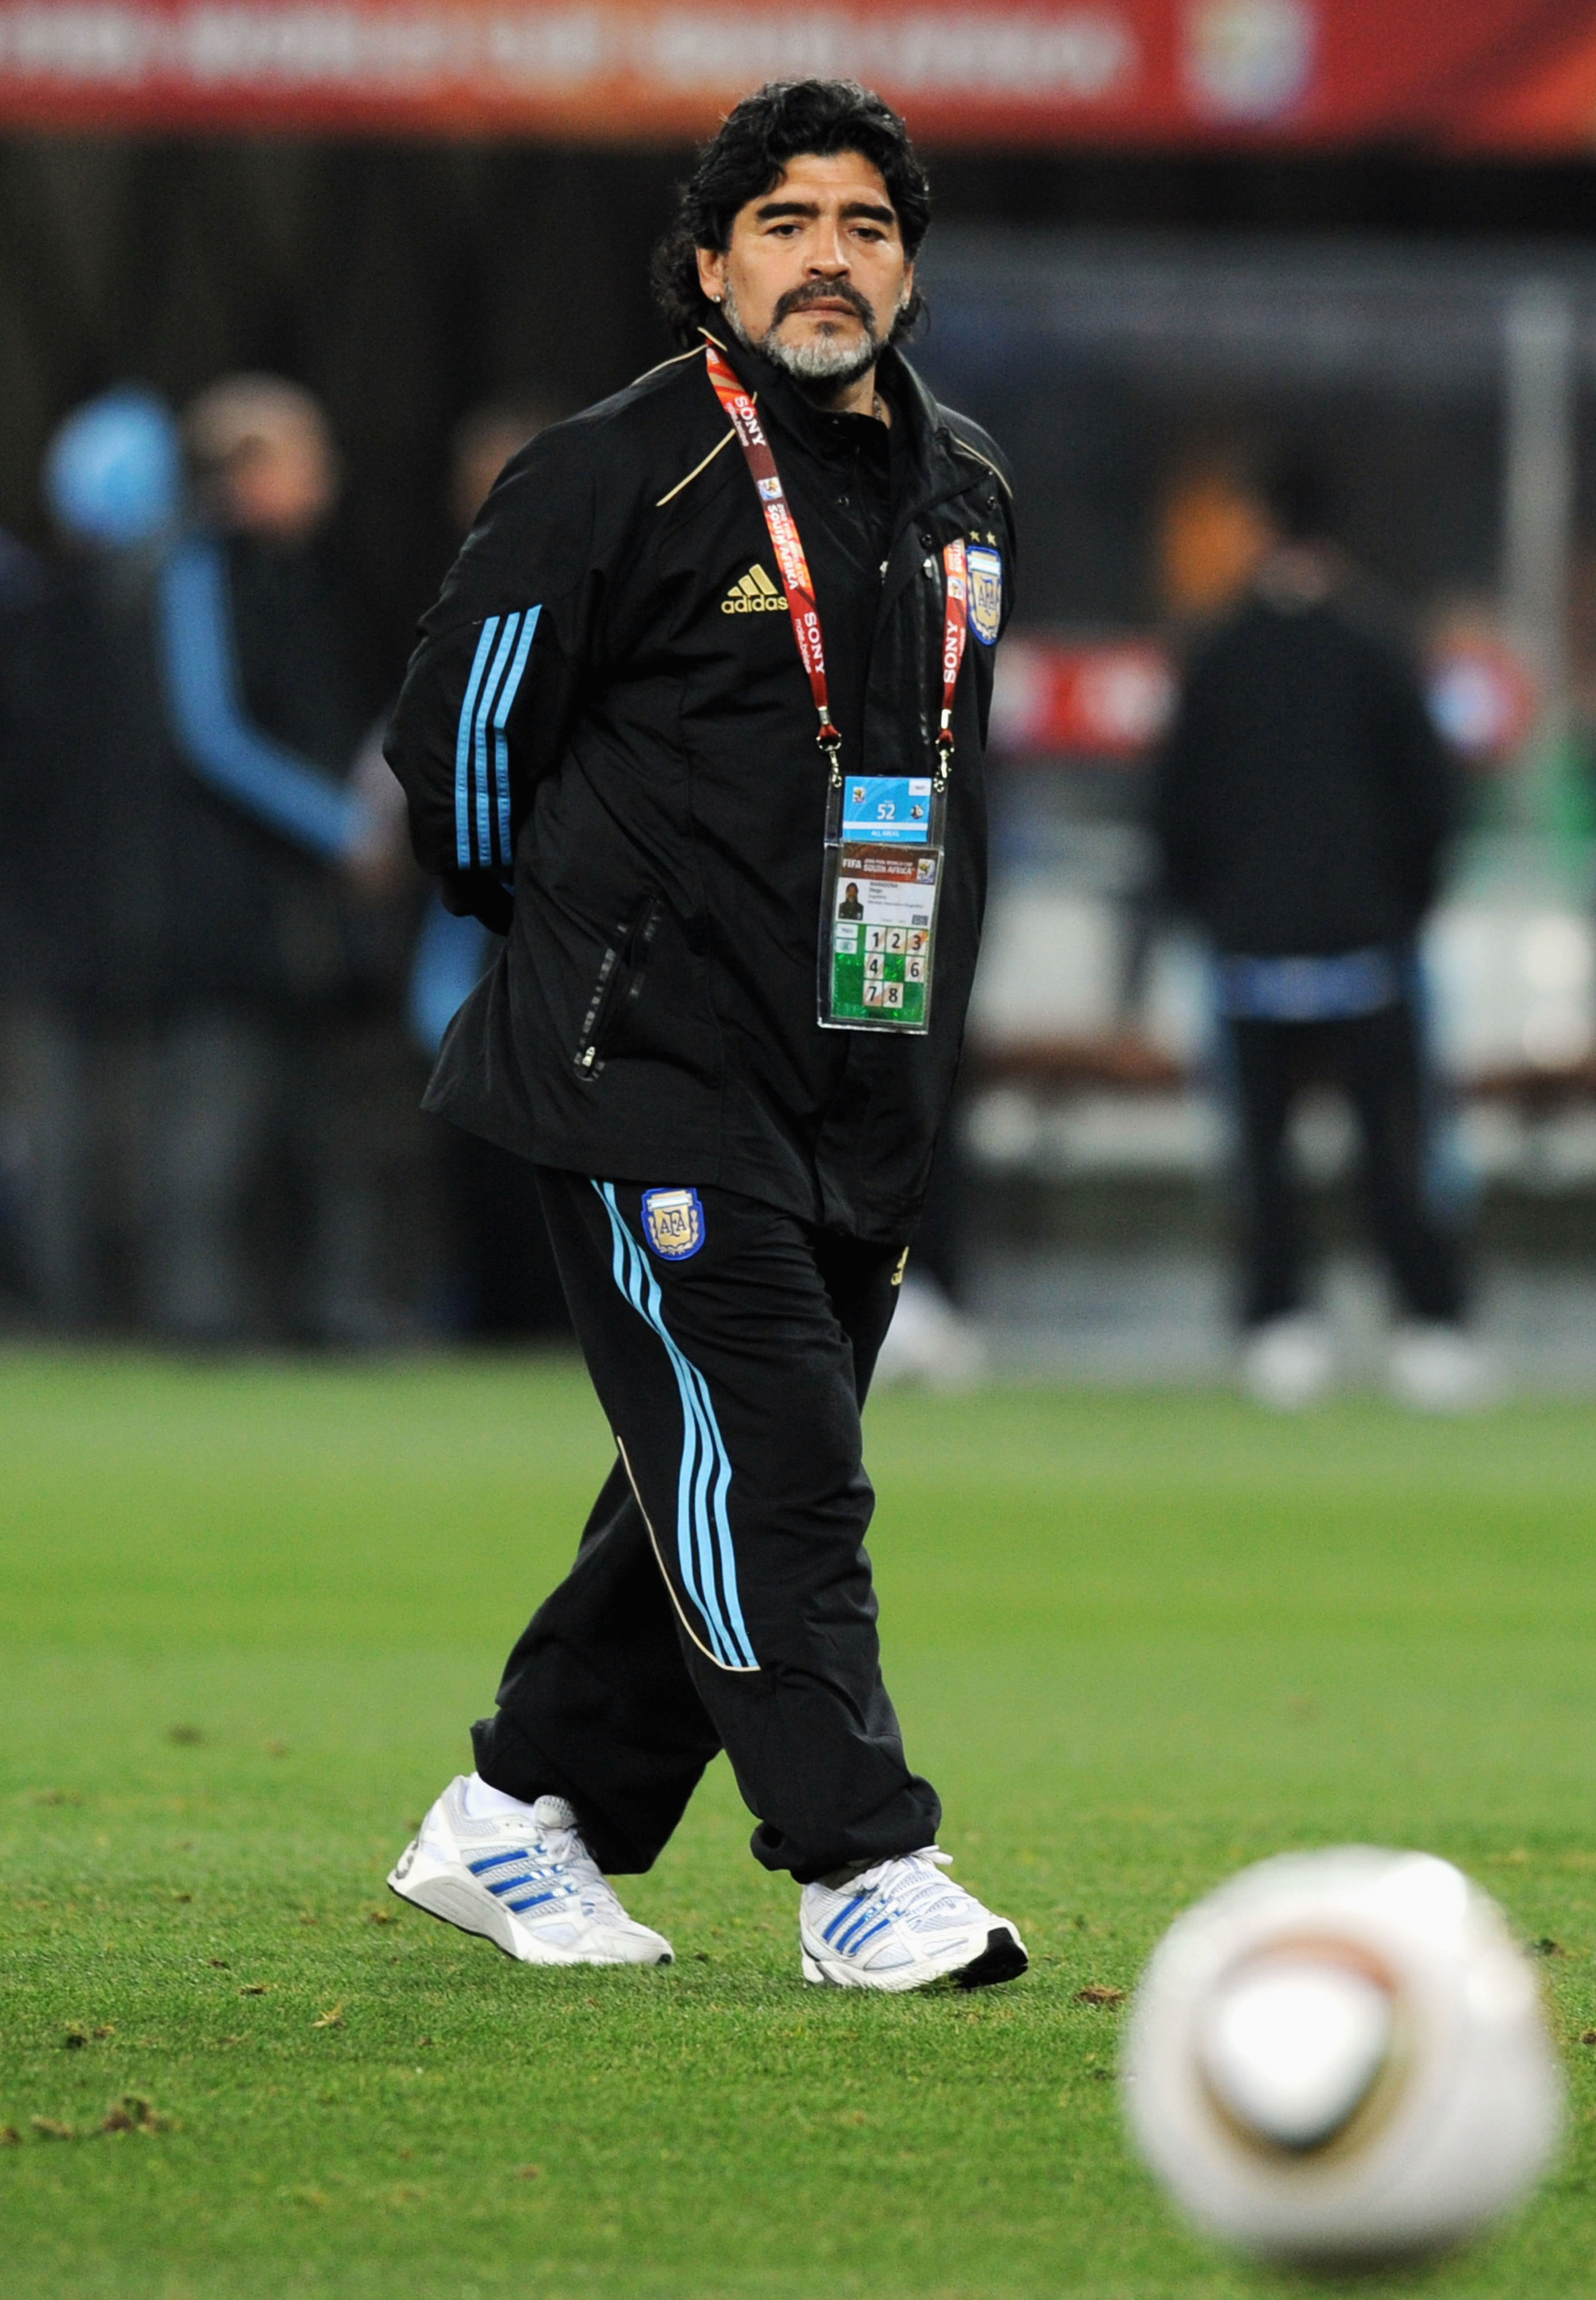 JOHANNESBURG, SOUTH AFRICA - JUNE 27:  Diego Maradona head coach of Argentina looks on during the warm up ahead of the 2010 FIFA World Cup South Africa Round of Sixteen match between Argentina and Mexico at Soccer City Stadium on June 27, 2010 in Johannes